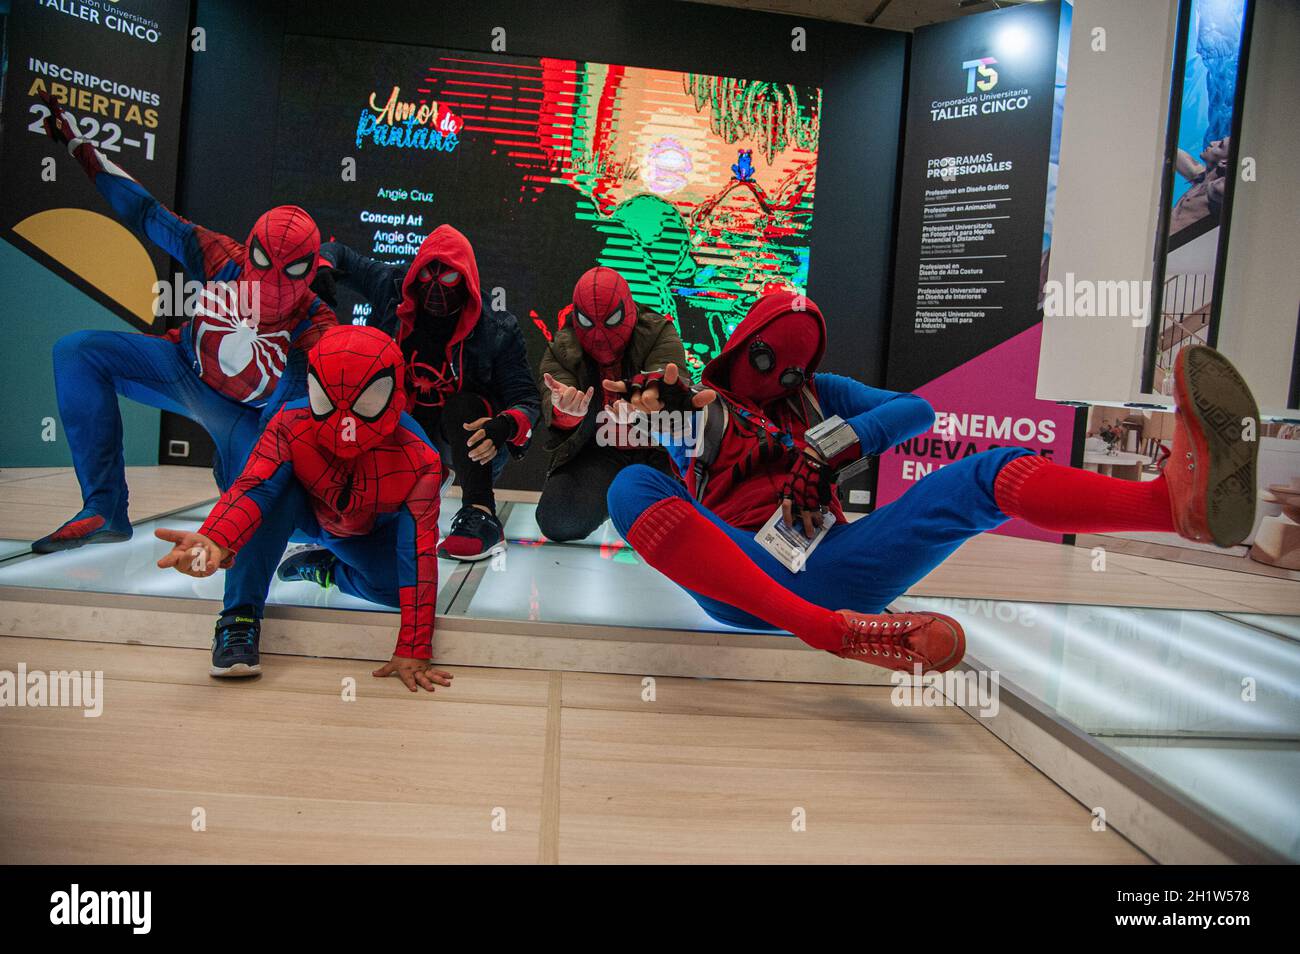 Bogota, Colombia, October 18, 2021. Several people cosplay different versions of Marvel's superhero Spider Man during the last day of the SOFA (Salon del Ocio y la Fantasia) 2021, a fair aimed to the geek audience in Colombia that mixes Cosplay, gaming, superhero and movie fans from across Colombia, in Bogota, Colombia on October 18, 2021. Stock Photo